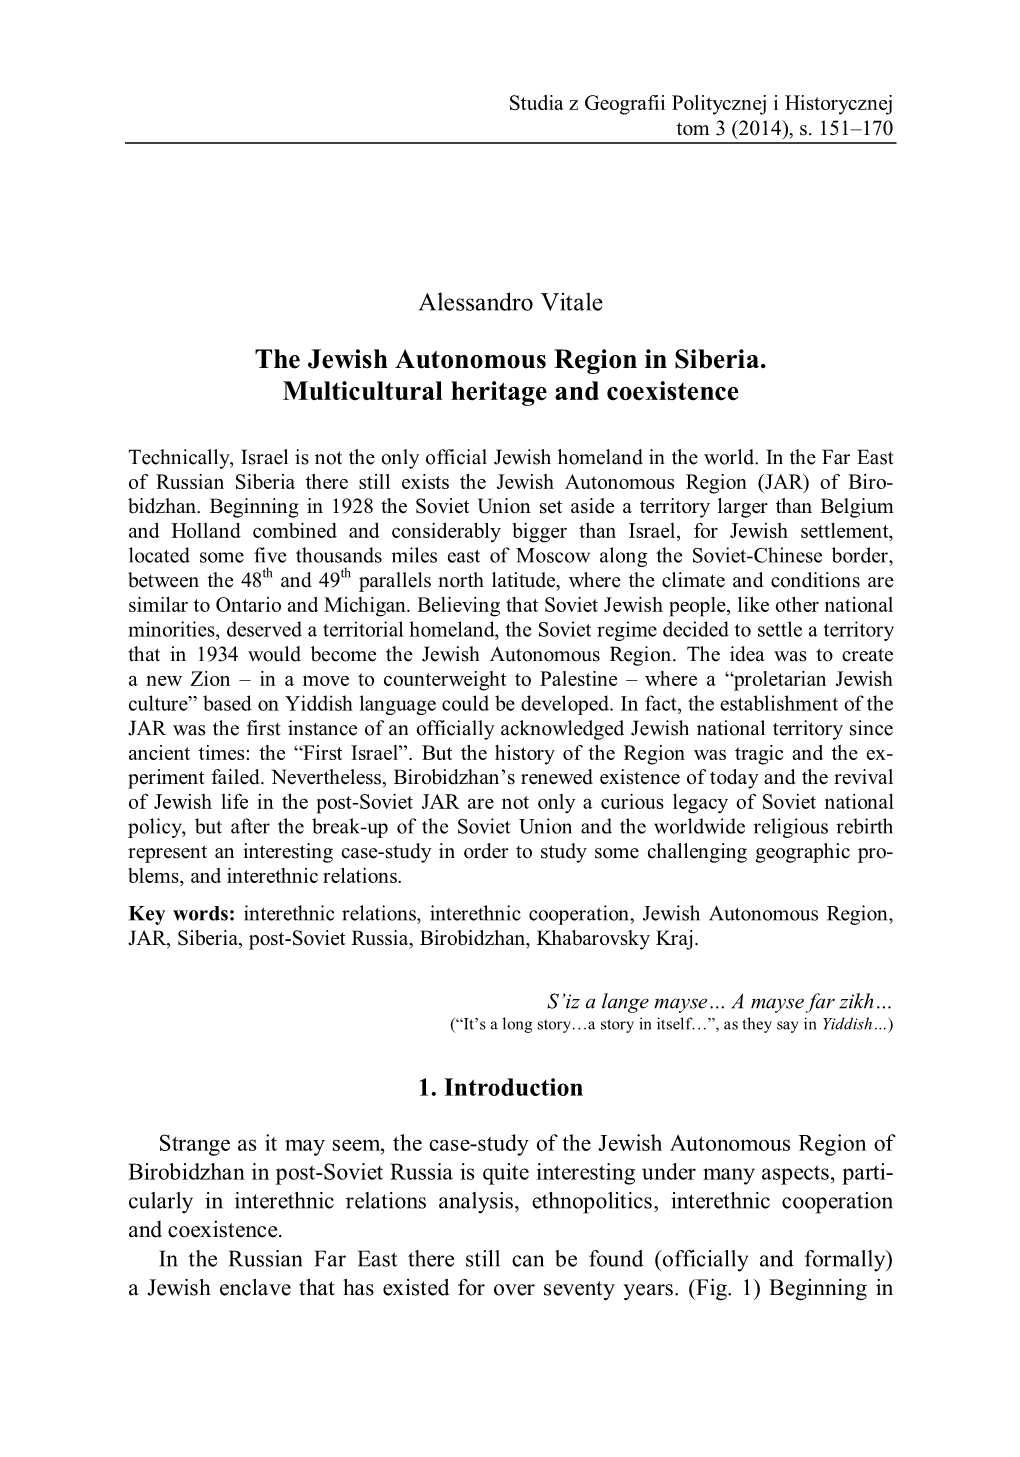 The Jewish Autonomous Region in Siberia. Multicultural Heritage and Coexistence